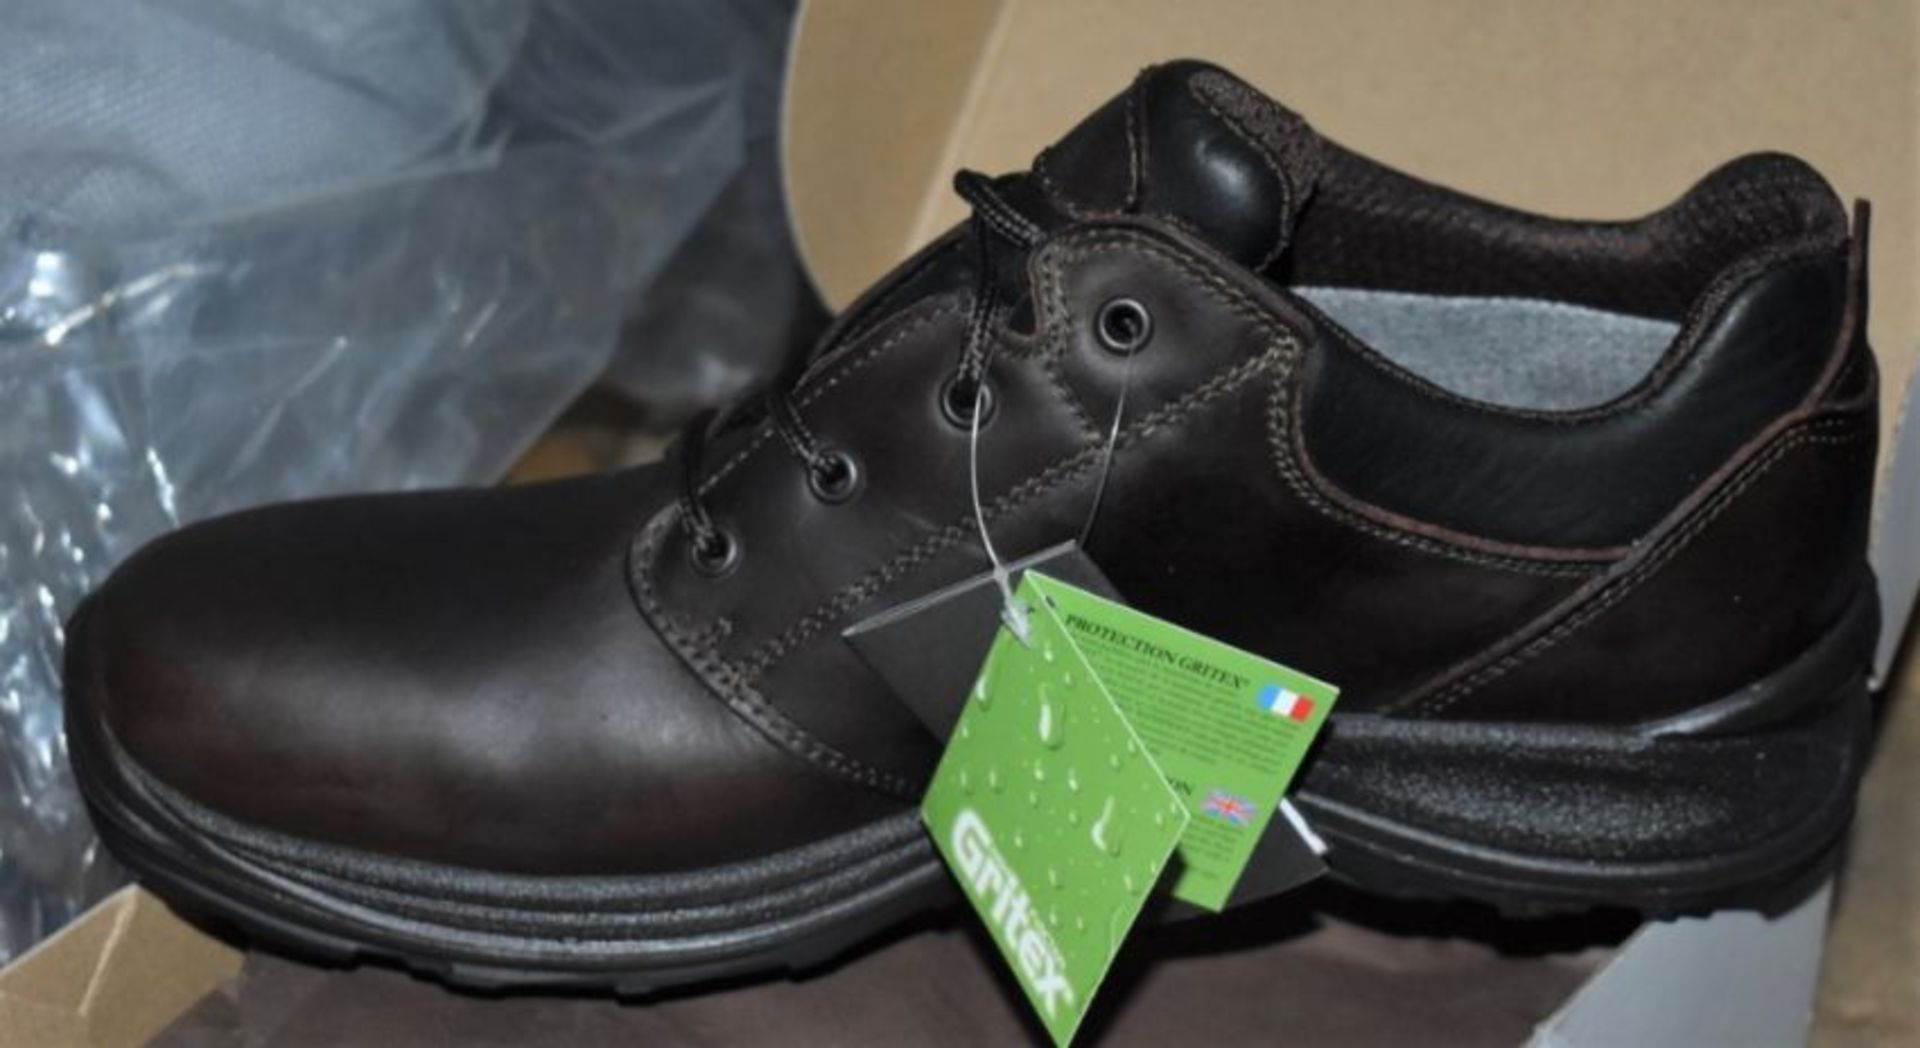 1 x Pair of Men's Grisport Brown Leather GriTex Shoes - Rogerson Footwear - Brand New and Boxed - - Image 3 of 8